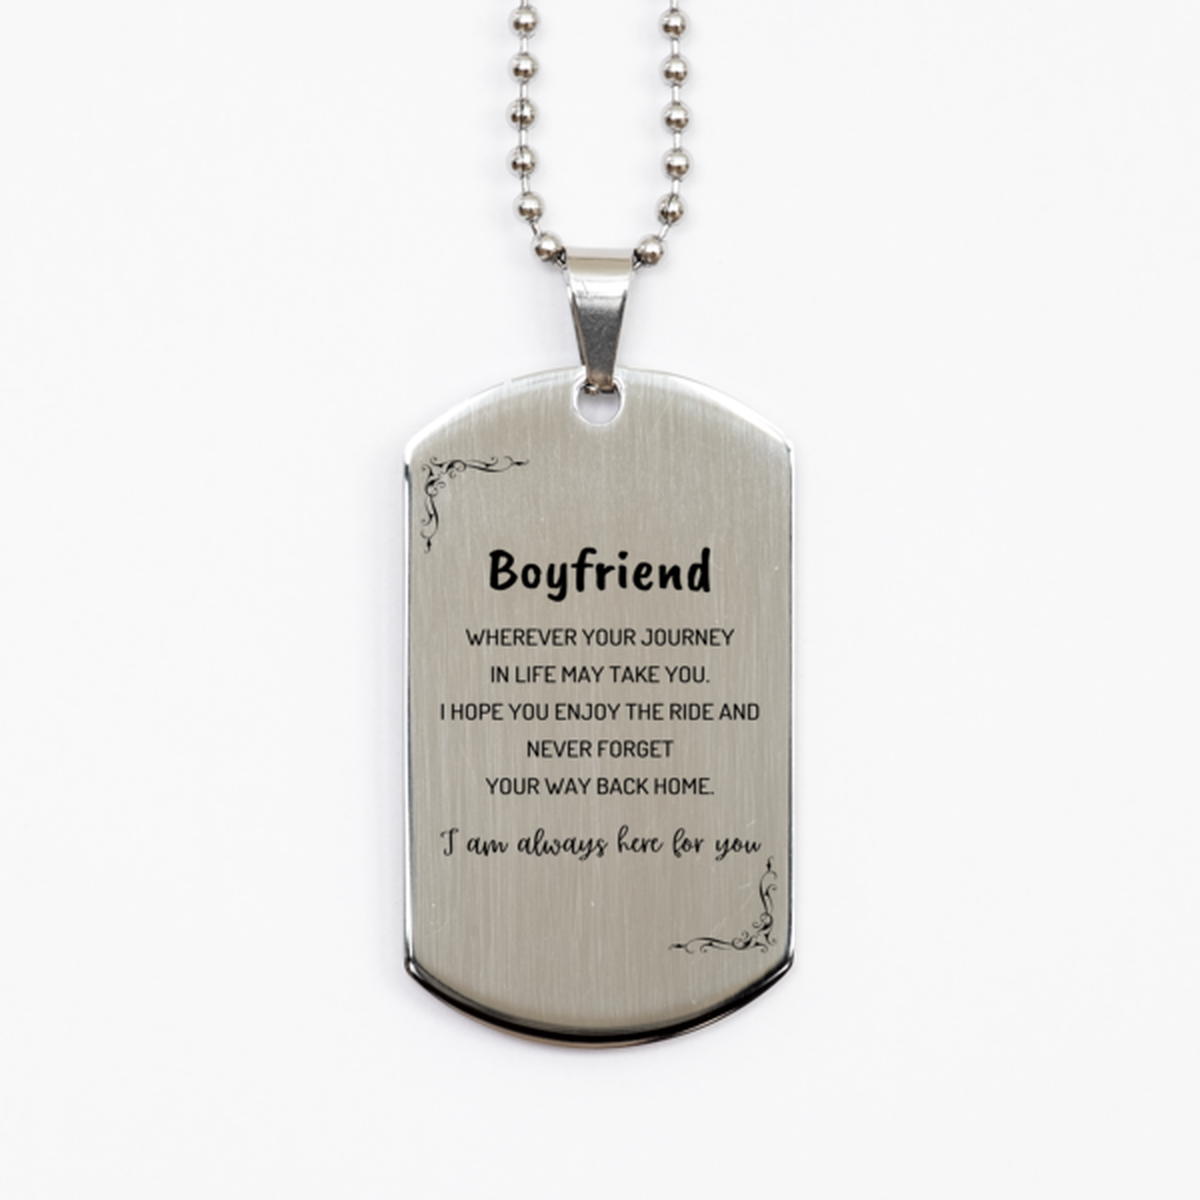 Boyfriend wherever your journey in life may take you, I am always here for you Boyfriend Silver Dog Tag, Awesome Christmas Gifts For Boyfriend, Boyfriend Birthday Gifts for Men Women Family Loved One